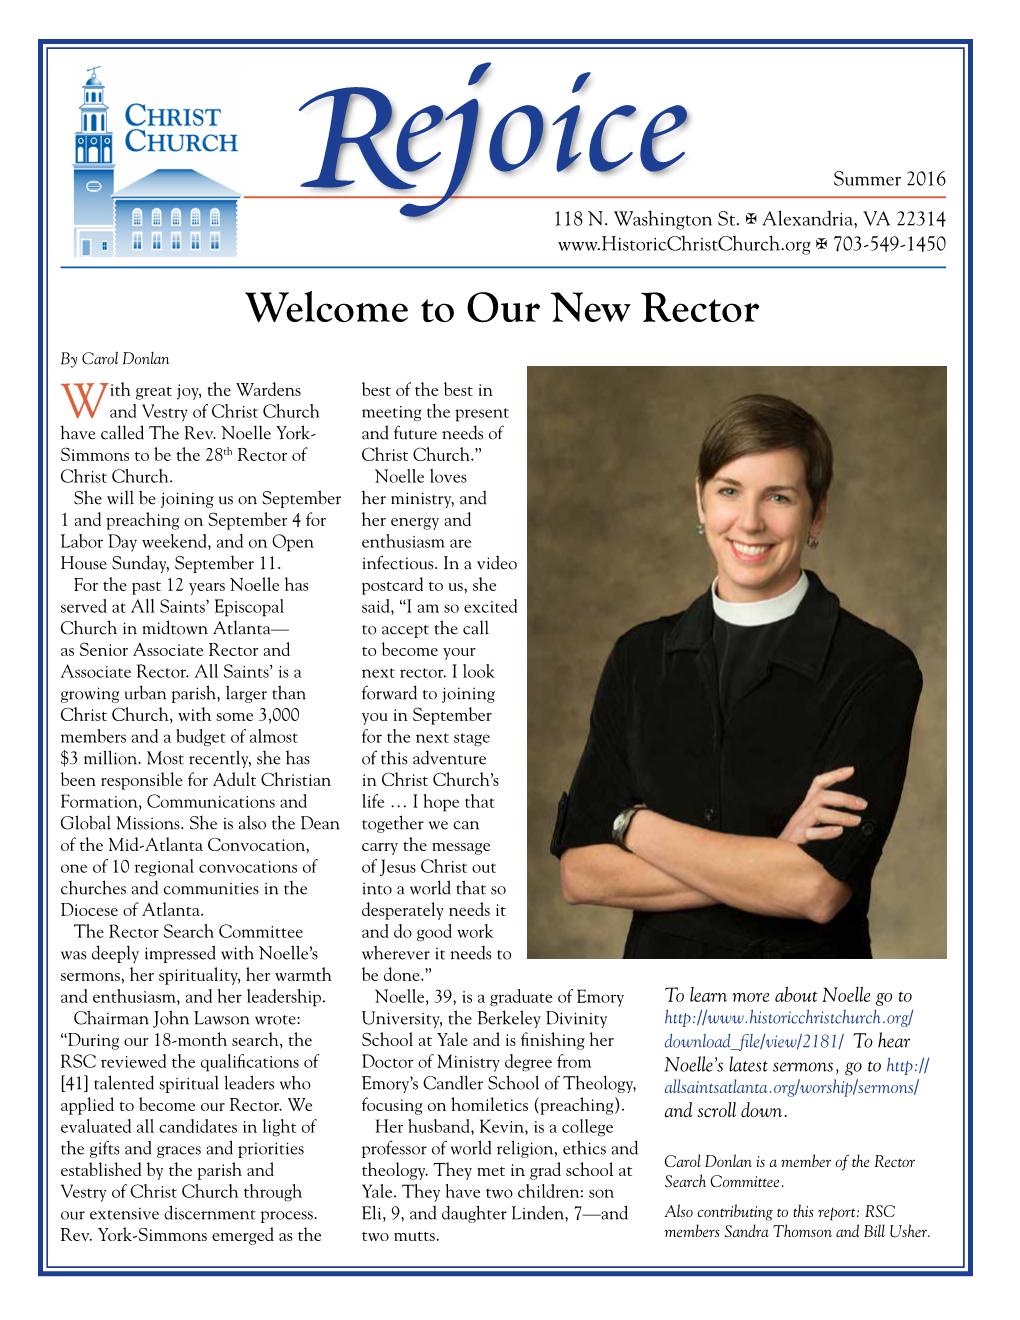 Welcome to Our New Rector